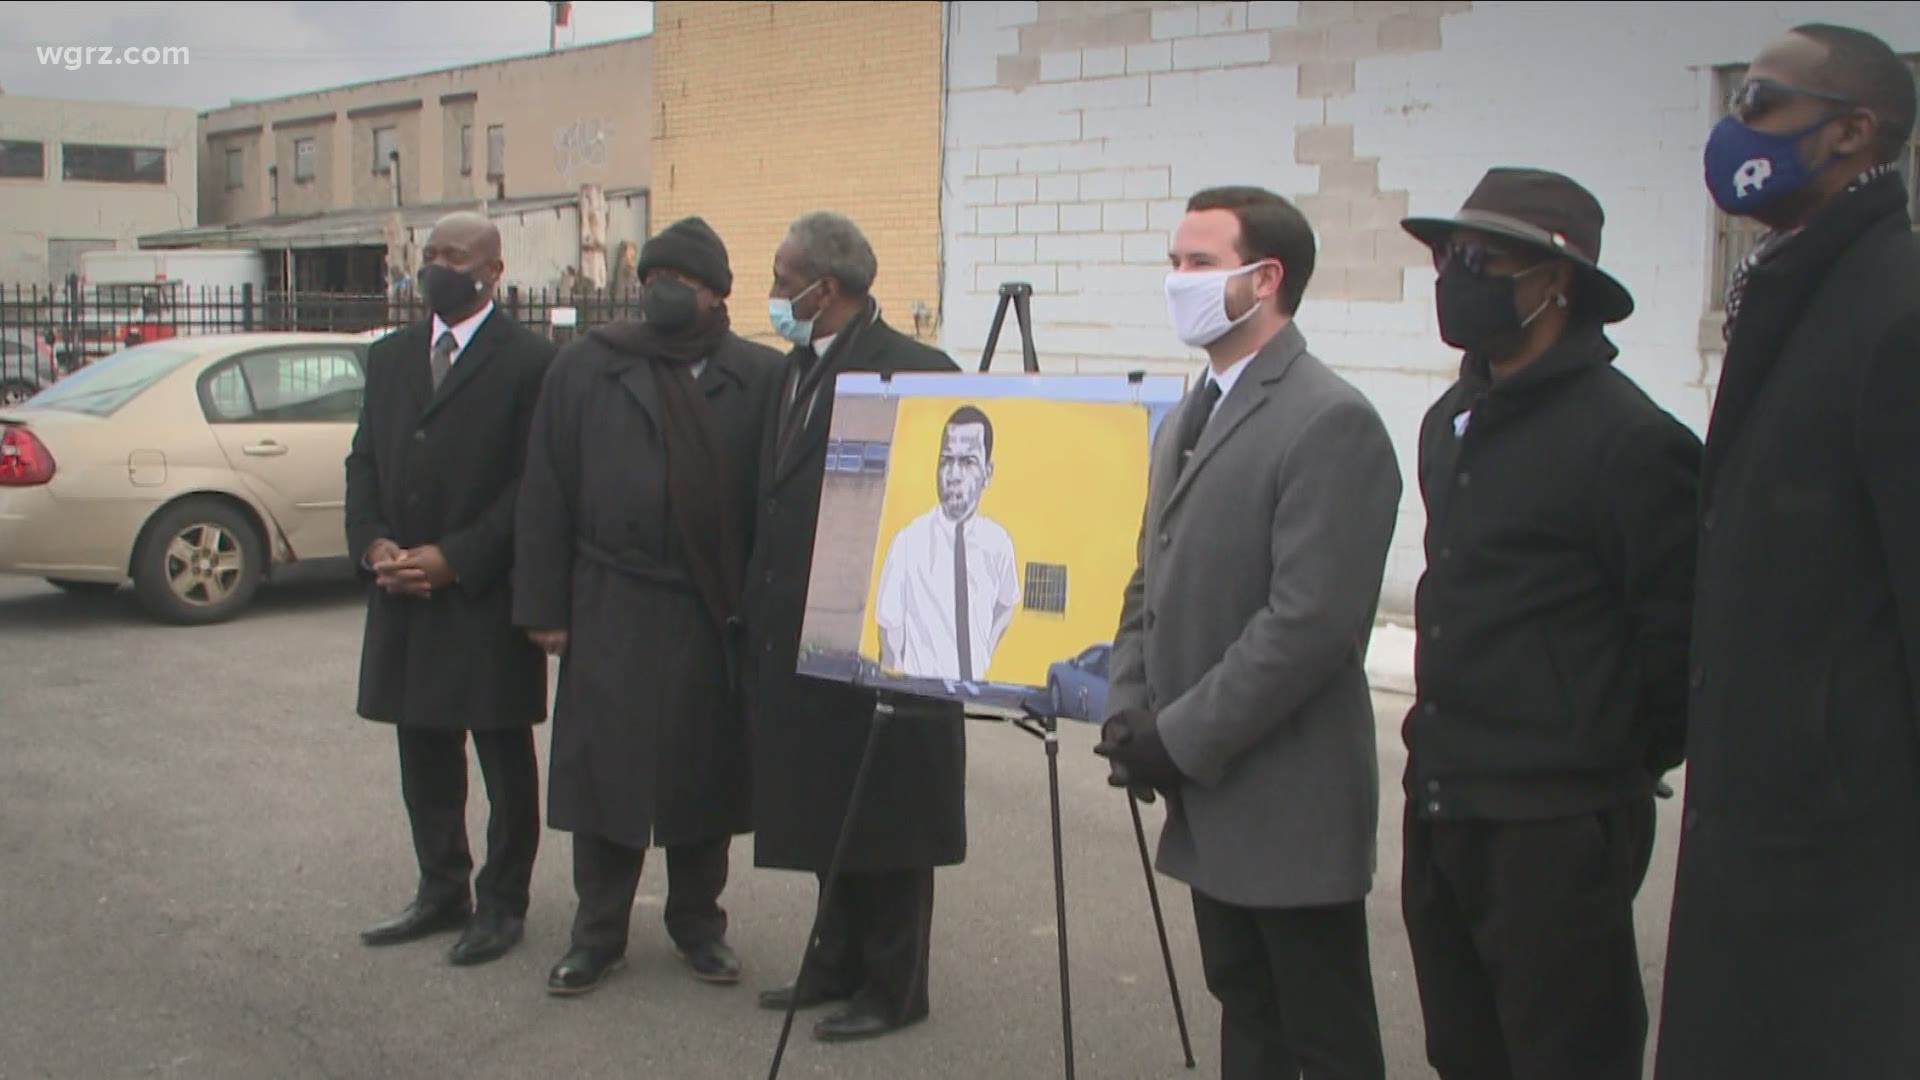 Today, an announcement was made about a new mural featuring the late congressman John Lewis.